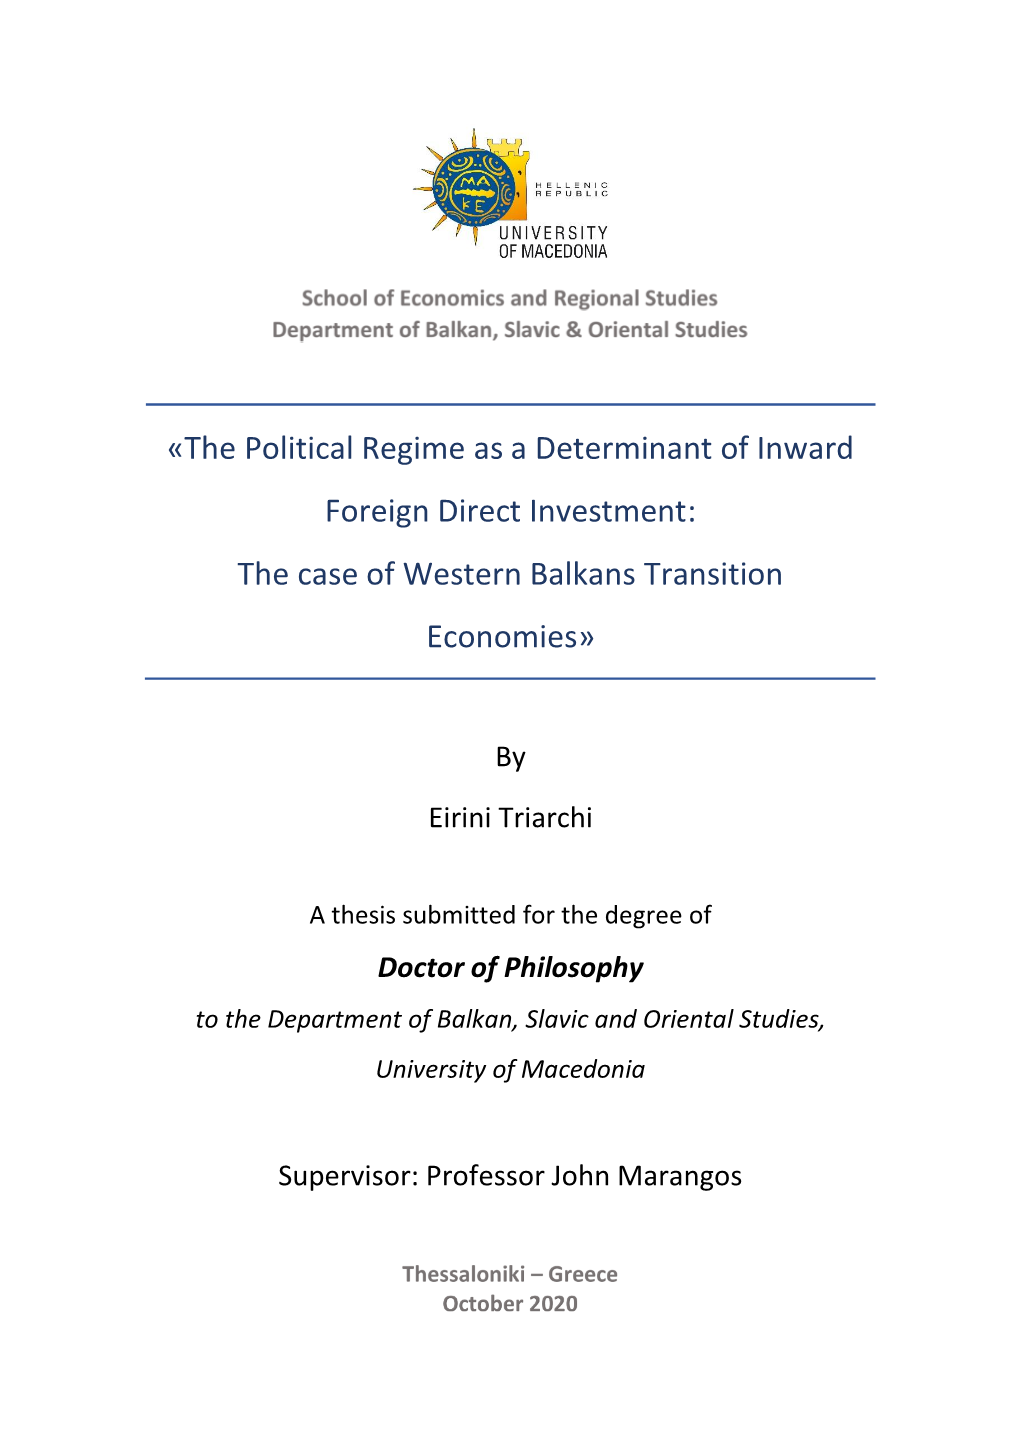 The Political Regime As a Determinant of Inward Foreign Direct Investment: the Case of Western Balkans Transition Economies»